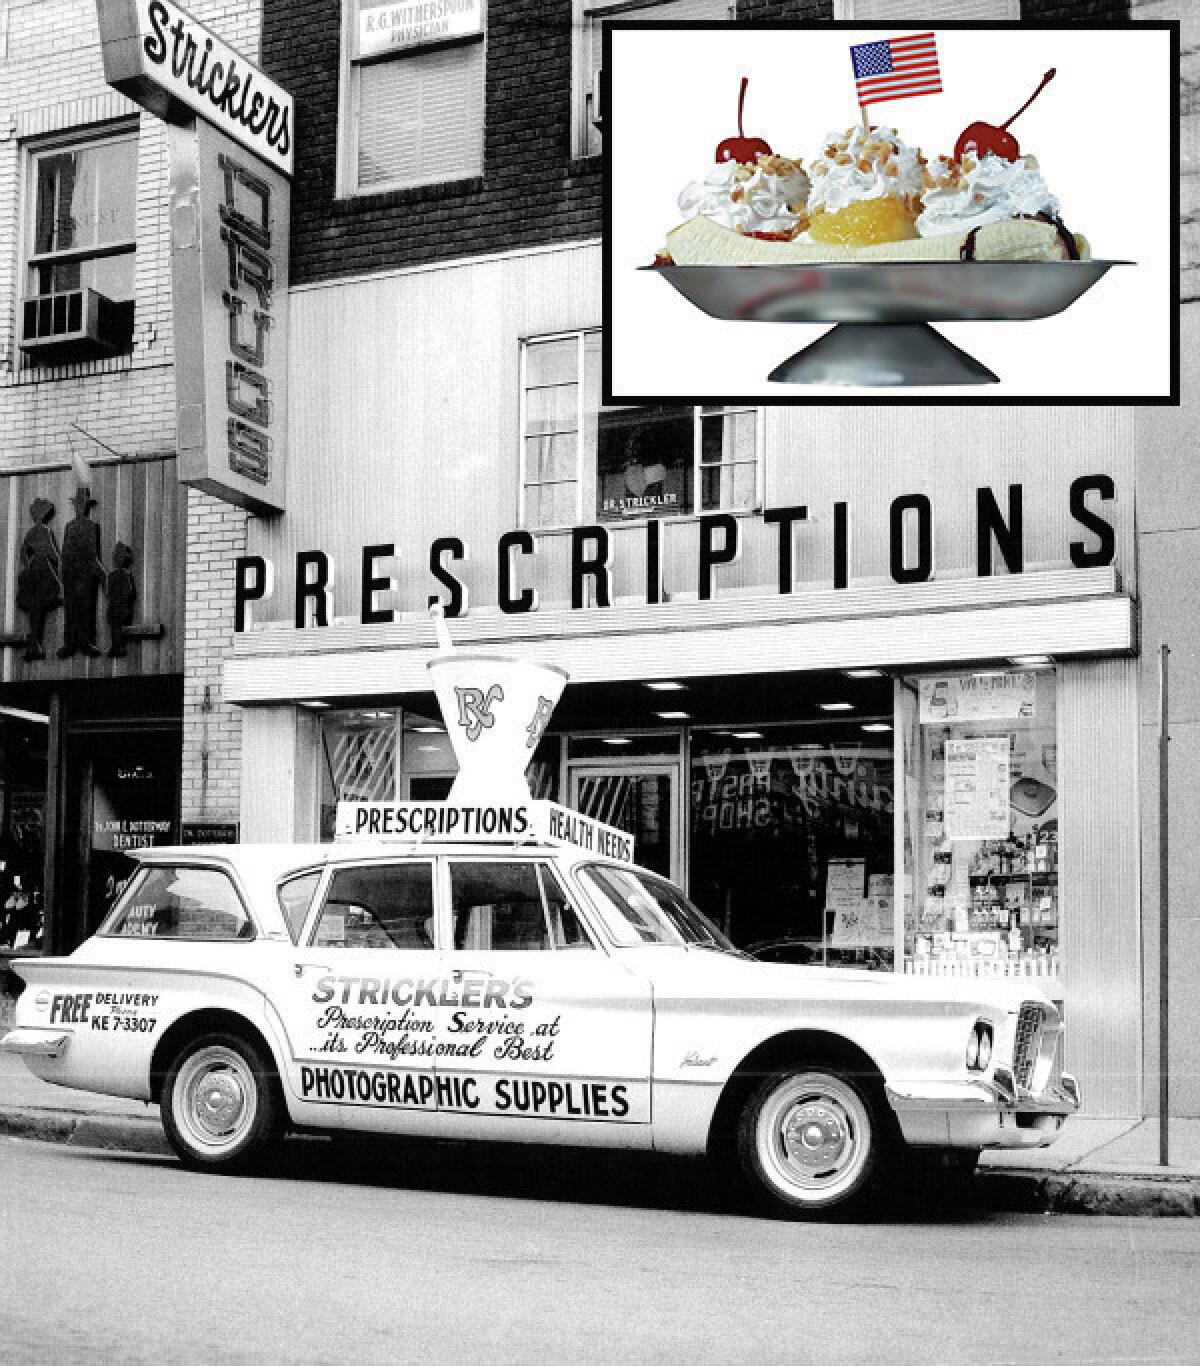 Strickler's drugstore in Latrobe, Pa., in 1955 is now defunct, but it was known for serving banana splits. The ice cream creation pictured above, served at Valley Dairy, is derived from the 1904 original that's said to have been invented in Latrobe.